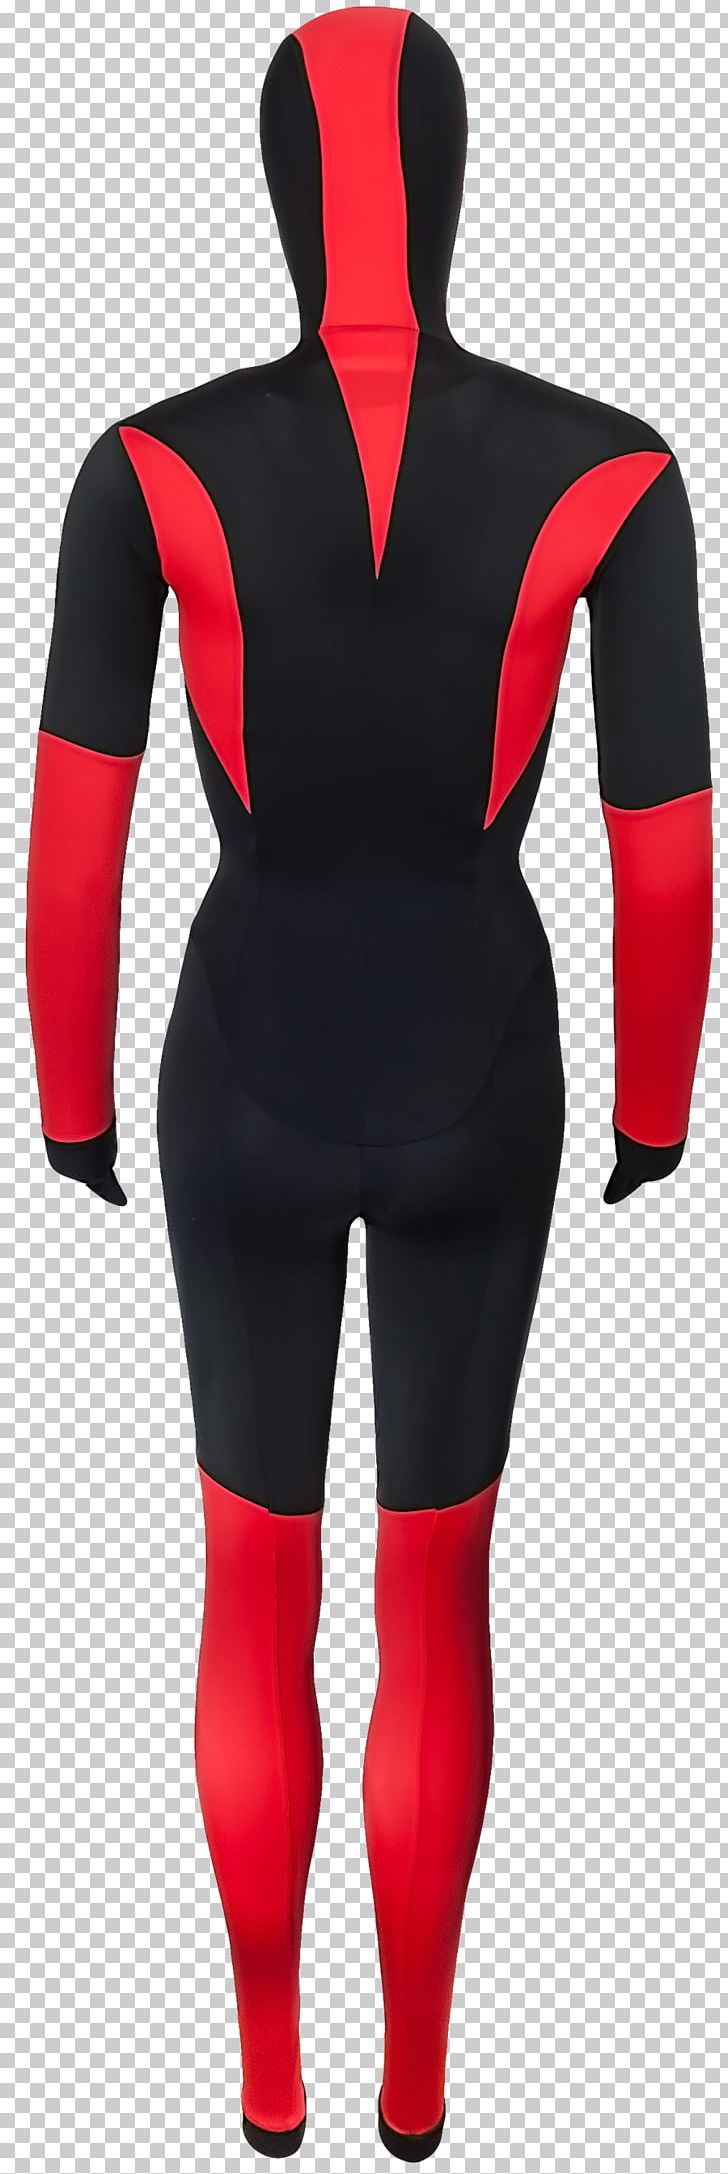 Wetsuit Spandex Shoulder Character Fiction PNG, Clipart, Character, Costume, Fiction, Fictional Character, Joint Free PNG Download